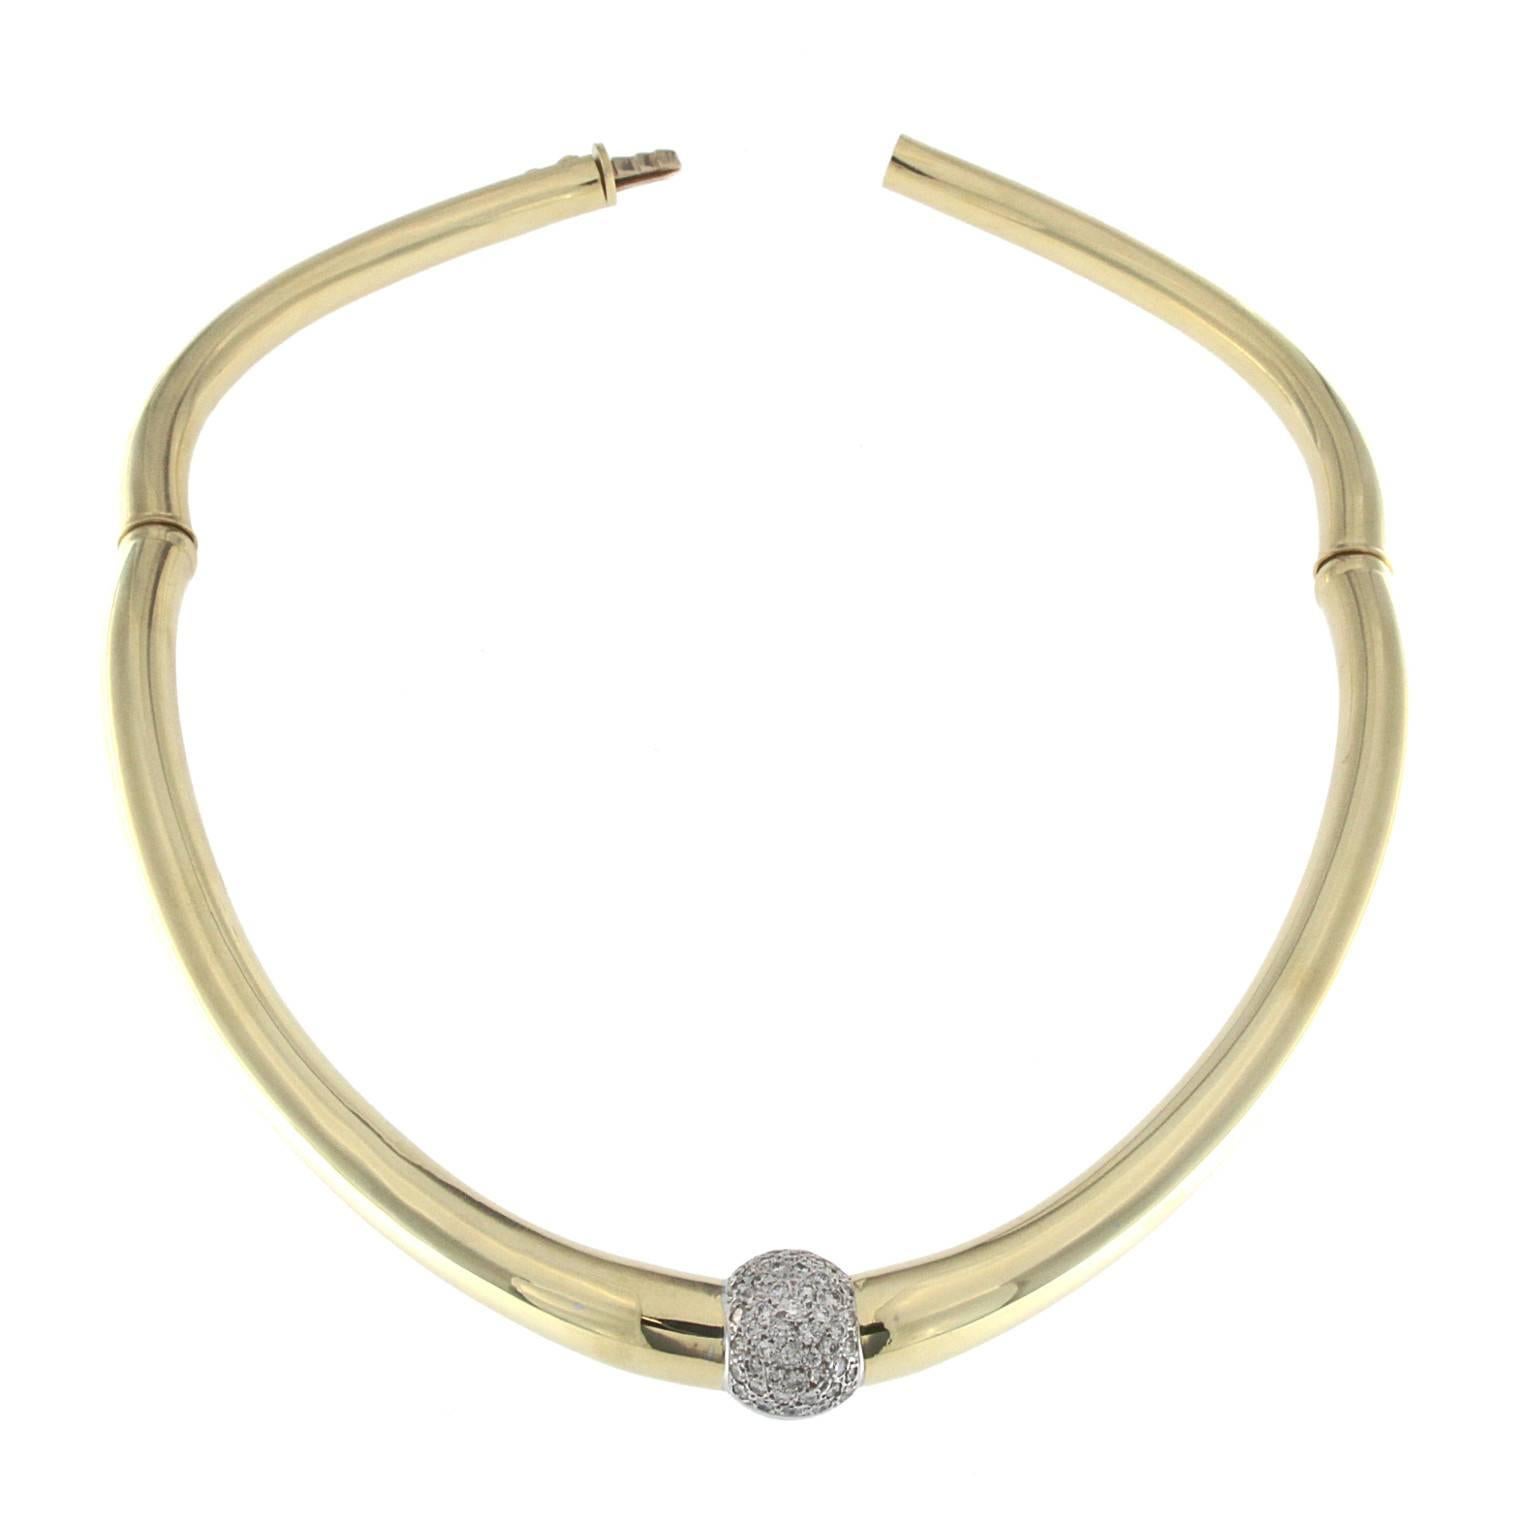 Beautiful set of lunar collection
Rigid chocker in 18 kt yellow gold embellished with white gold moon and white diamonds
Hard bracelet in sets and ring with mobile moon
The necklace has a diameter of 12x13 cm
The cuff has a diameter of 6x5 cm
The